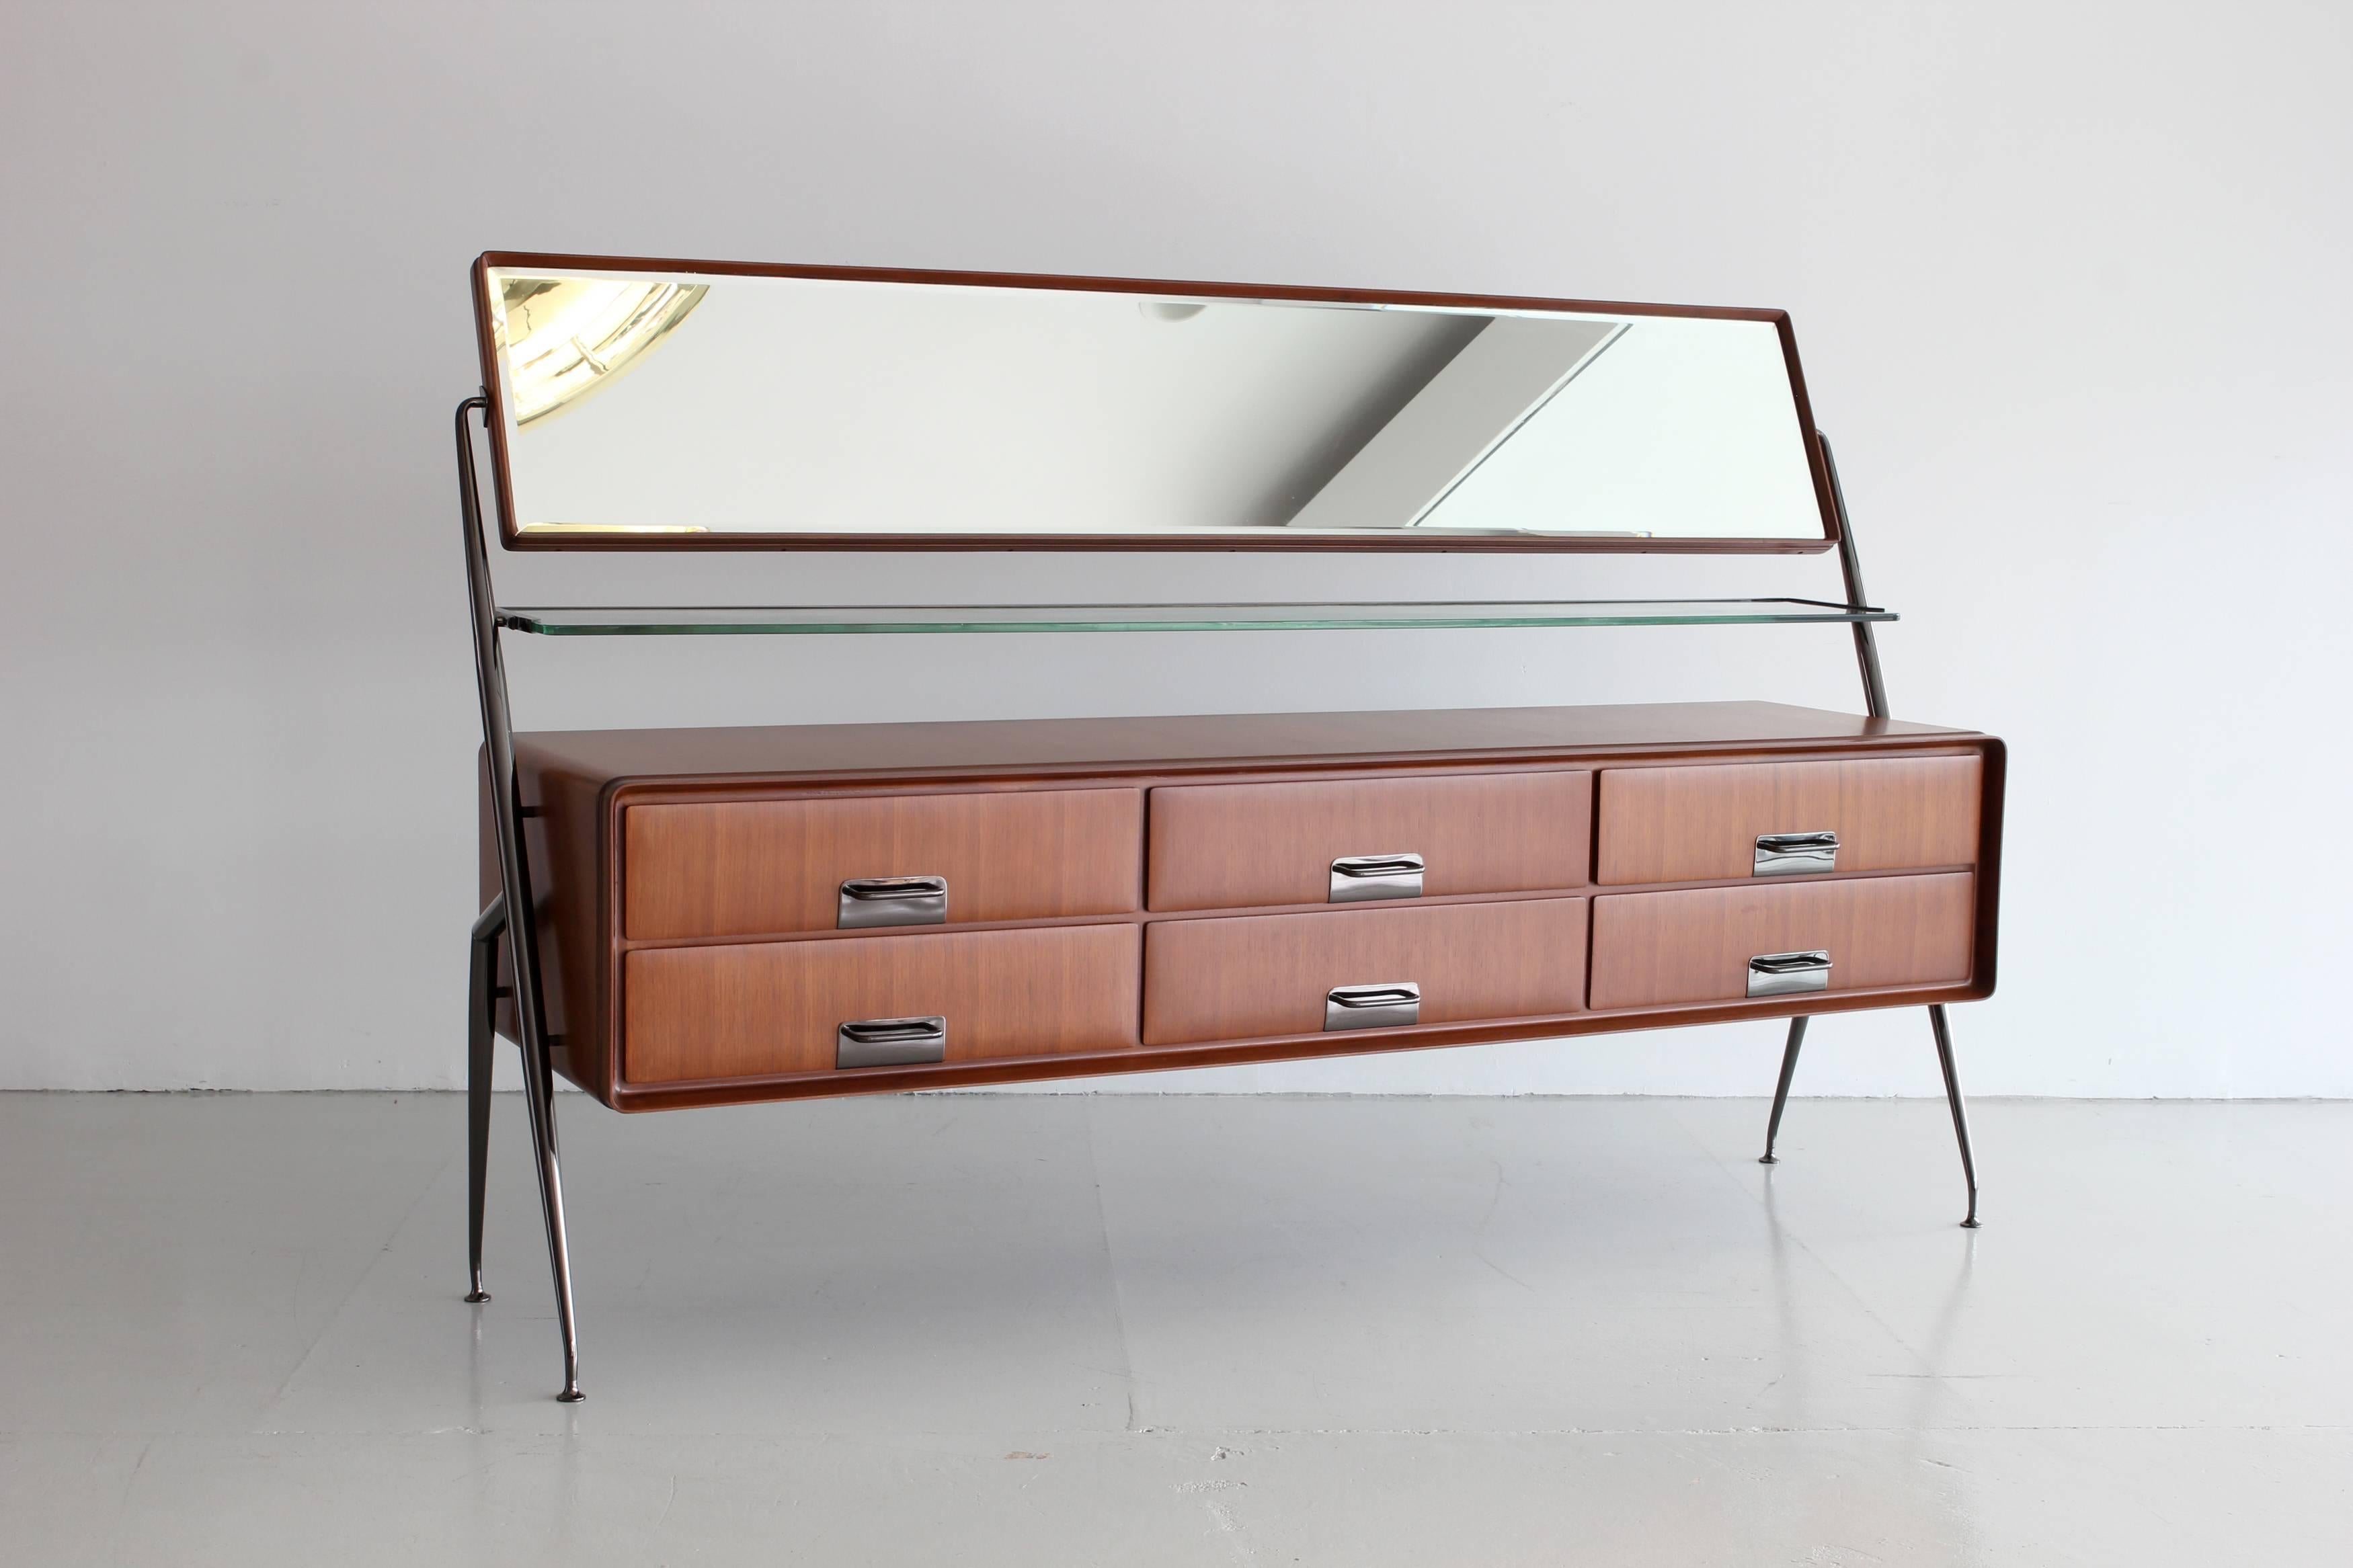 Silvio Cavatorta cabinet with six dresser drawers, horizontal tilting mirror over a glass shelf and tapered angular legs and hardware newly plated in black polished nickel.
Newly refinished.